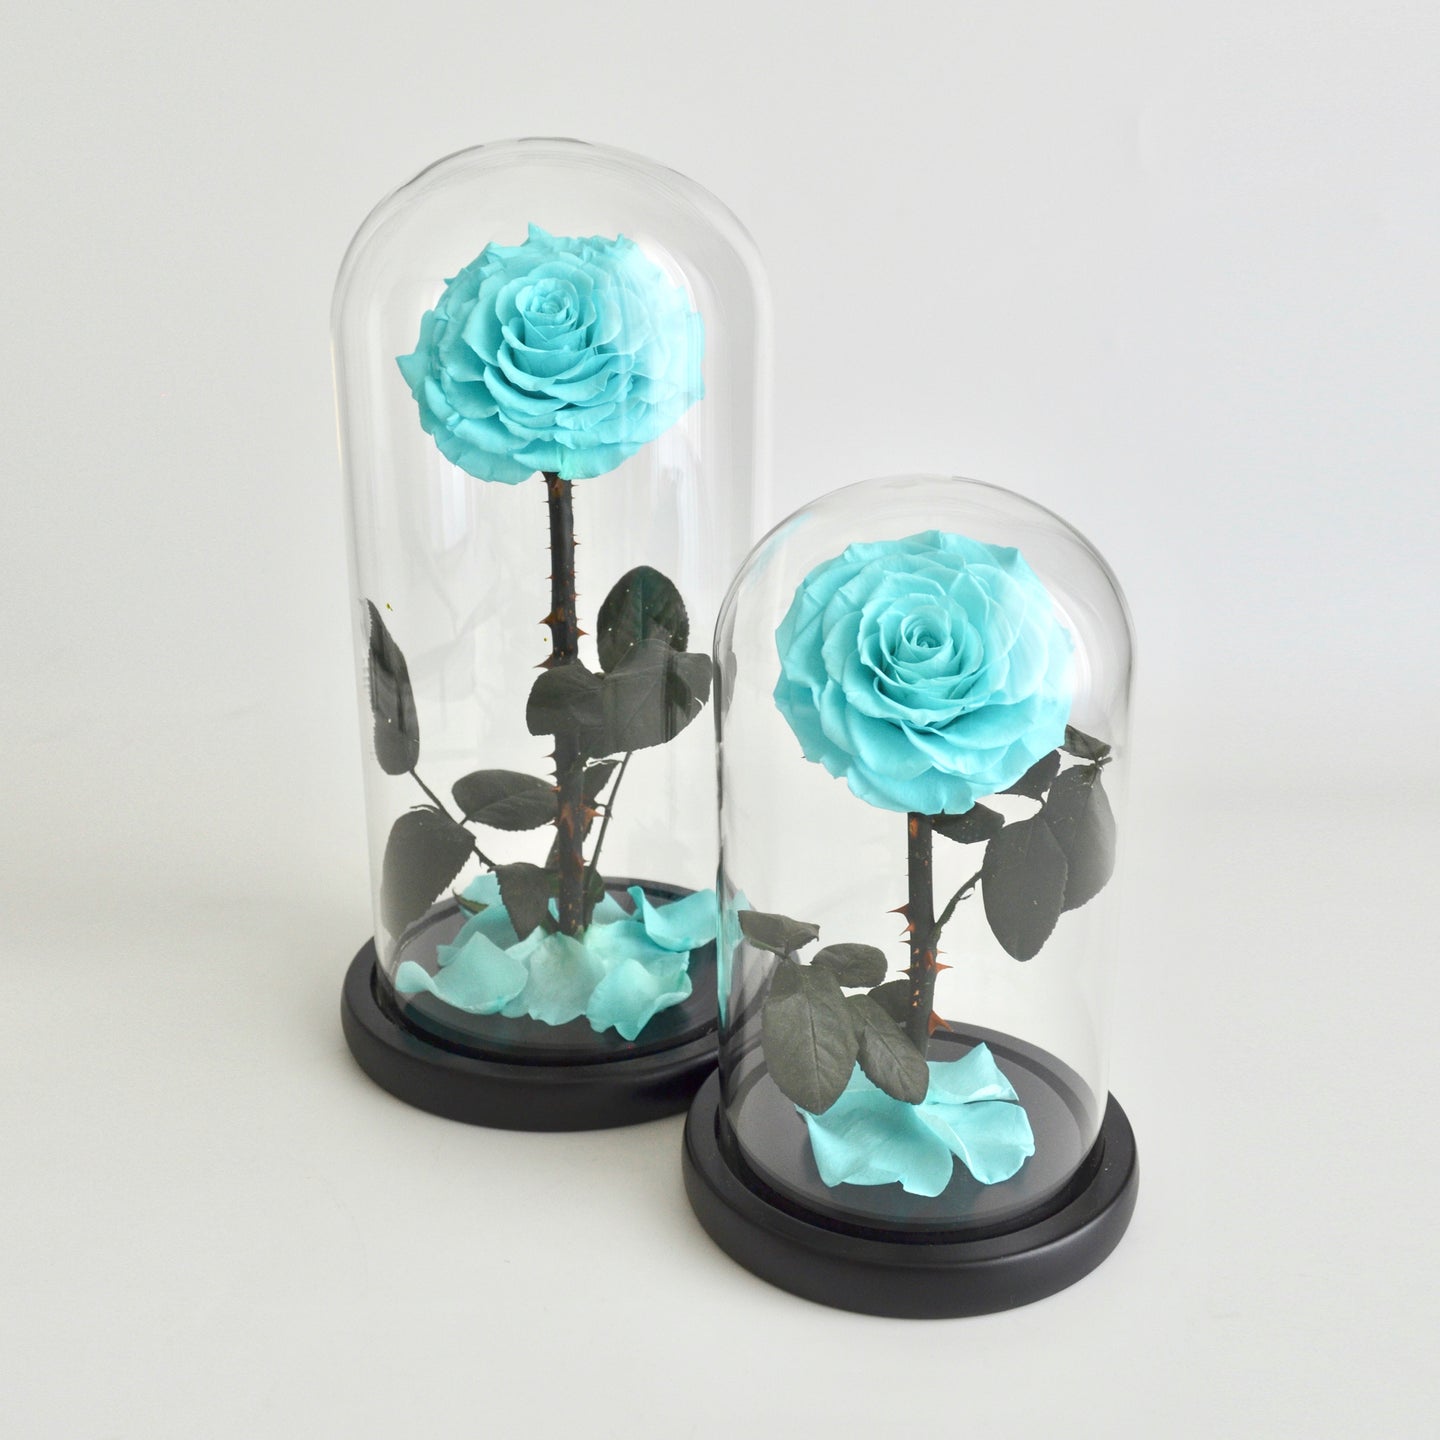 Timeless Prince's Rose, Teal